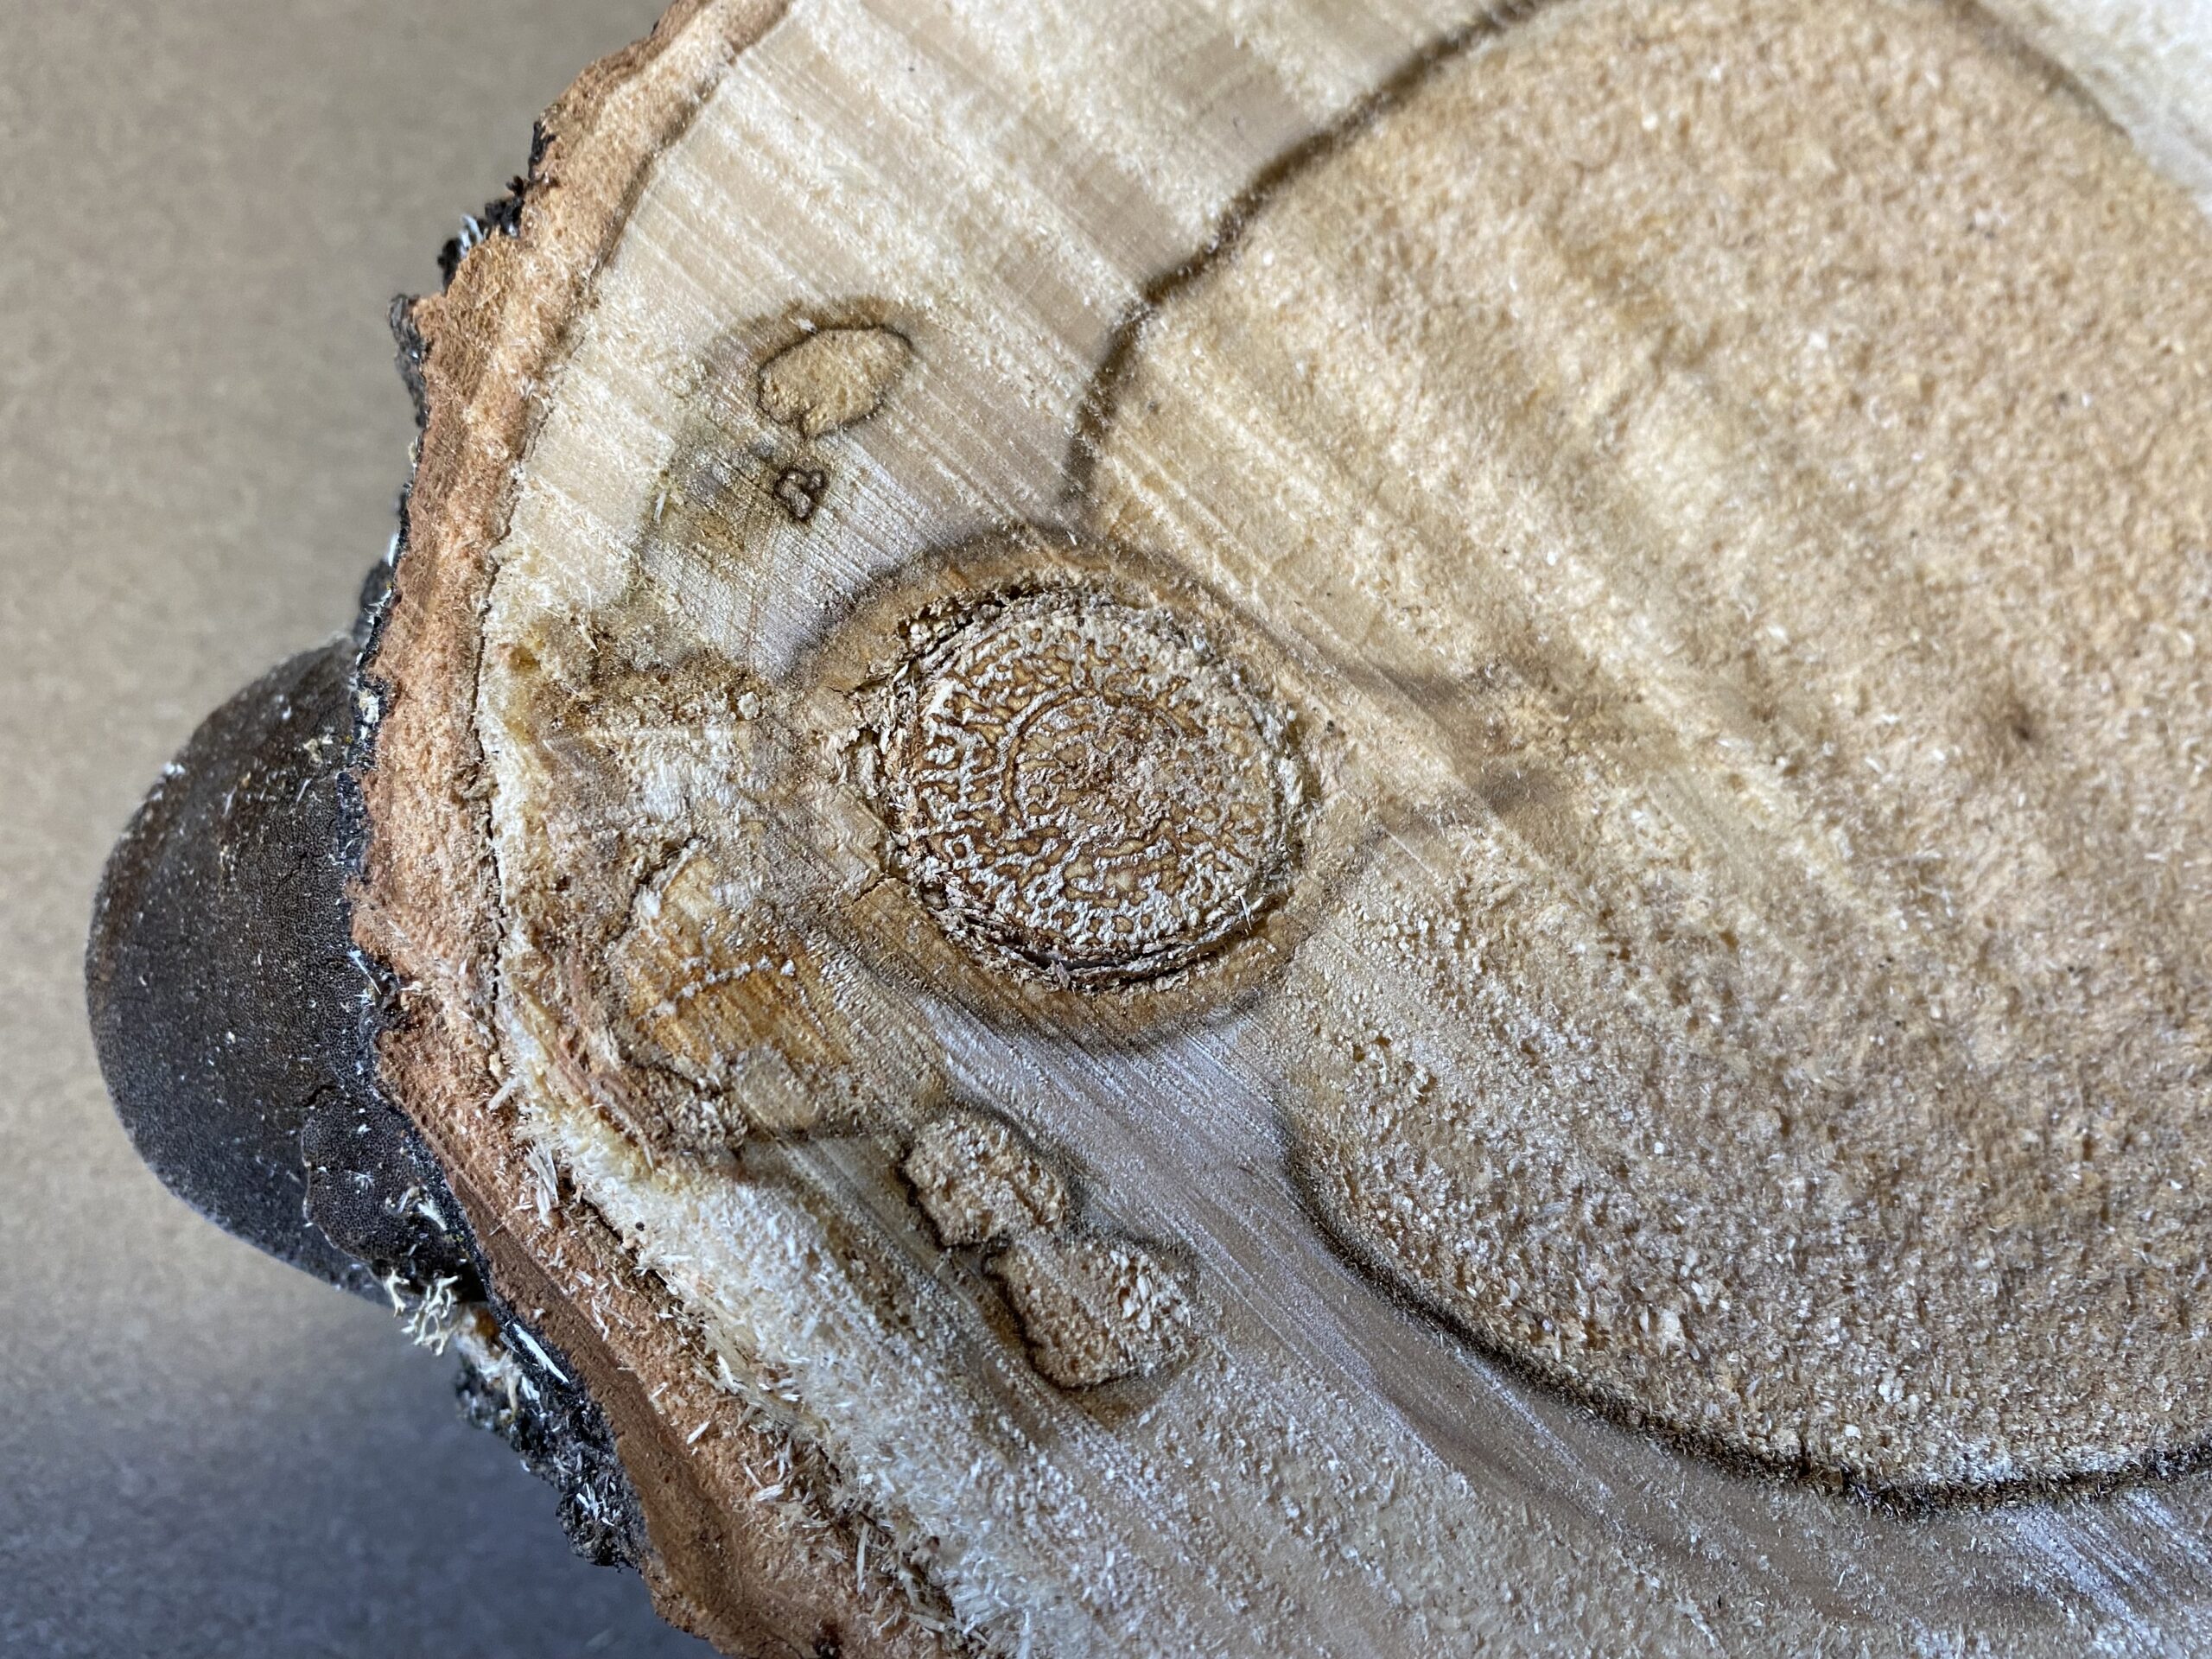 A cross section of the trunk of an aspen with significant decay in the center and a fruiting body conk on the side of the wood.